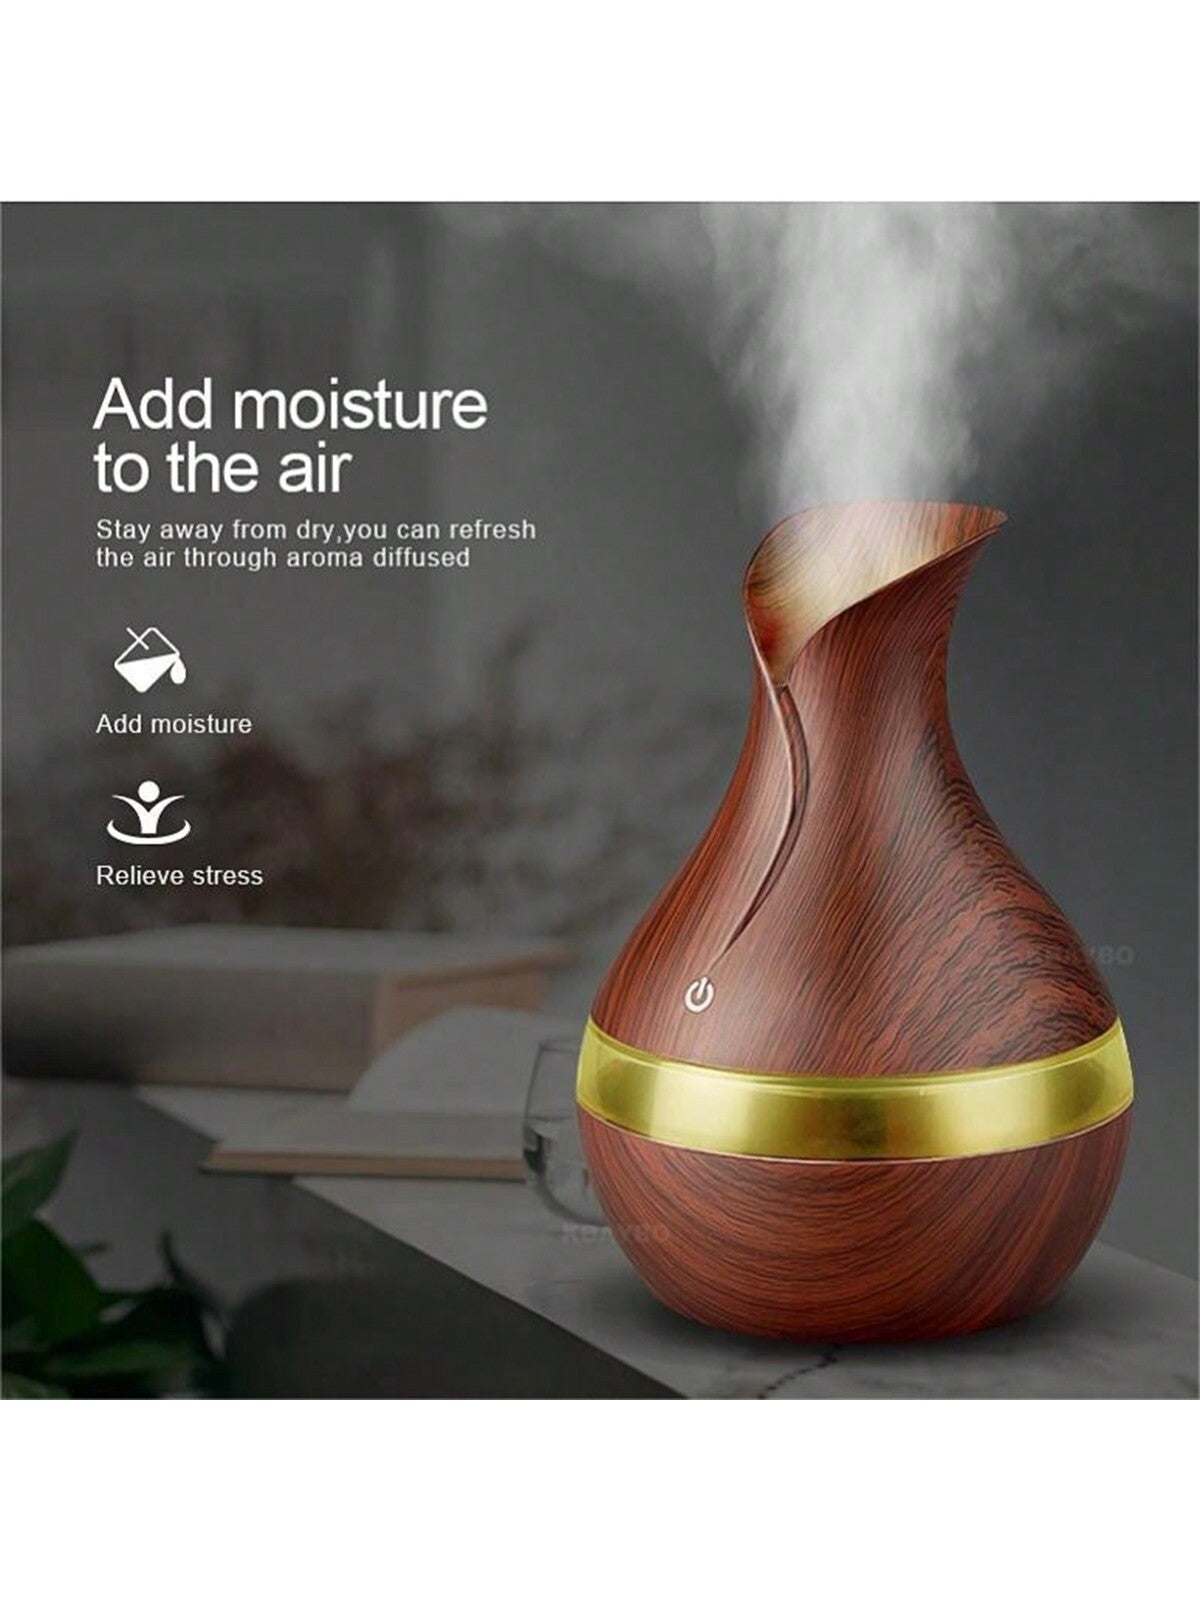 1pc Portable Desktop Usb Wood Grain Humidifier, Aroma Diffuser, Atomizer, Moisturizer, Air Purifier With Flower Vase Design, Suitable For Home, Bedroom, Outdoor, Travel-light wood grain-4